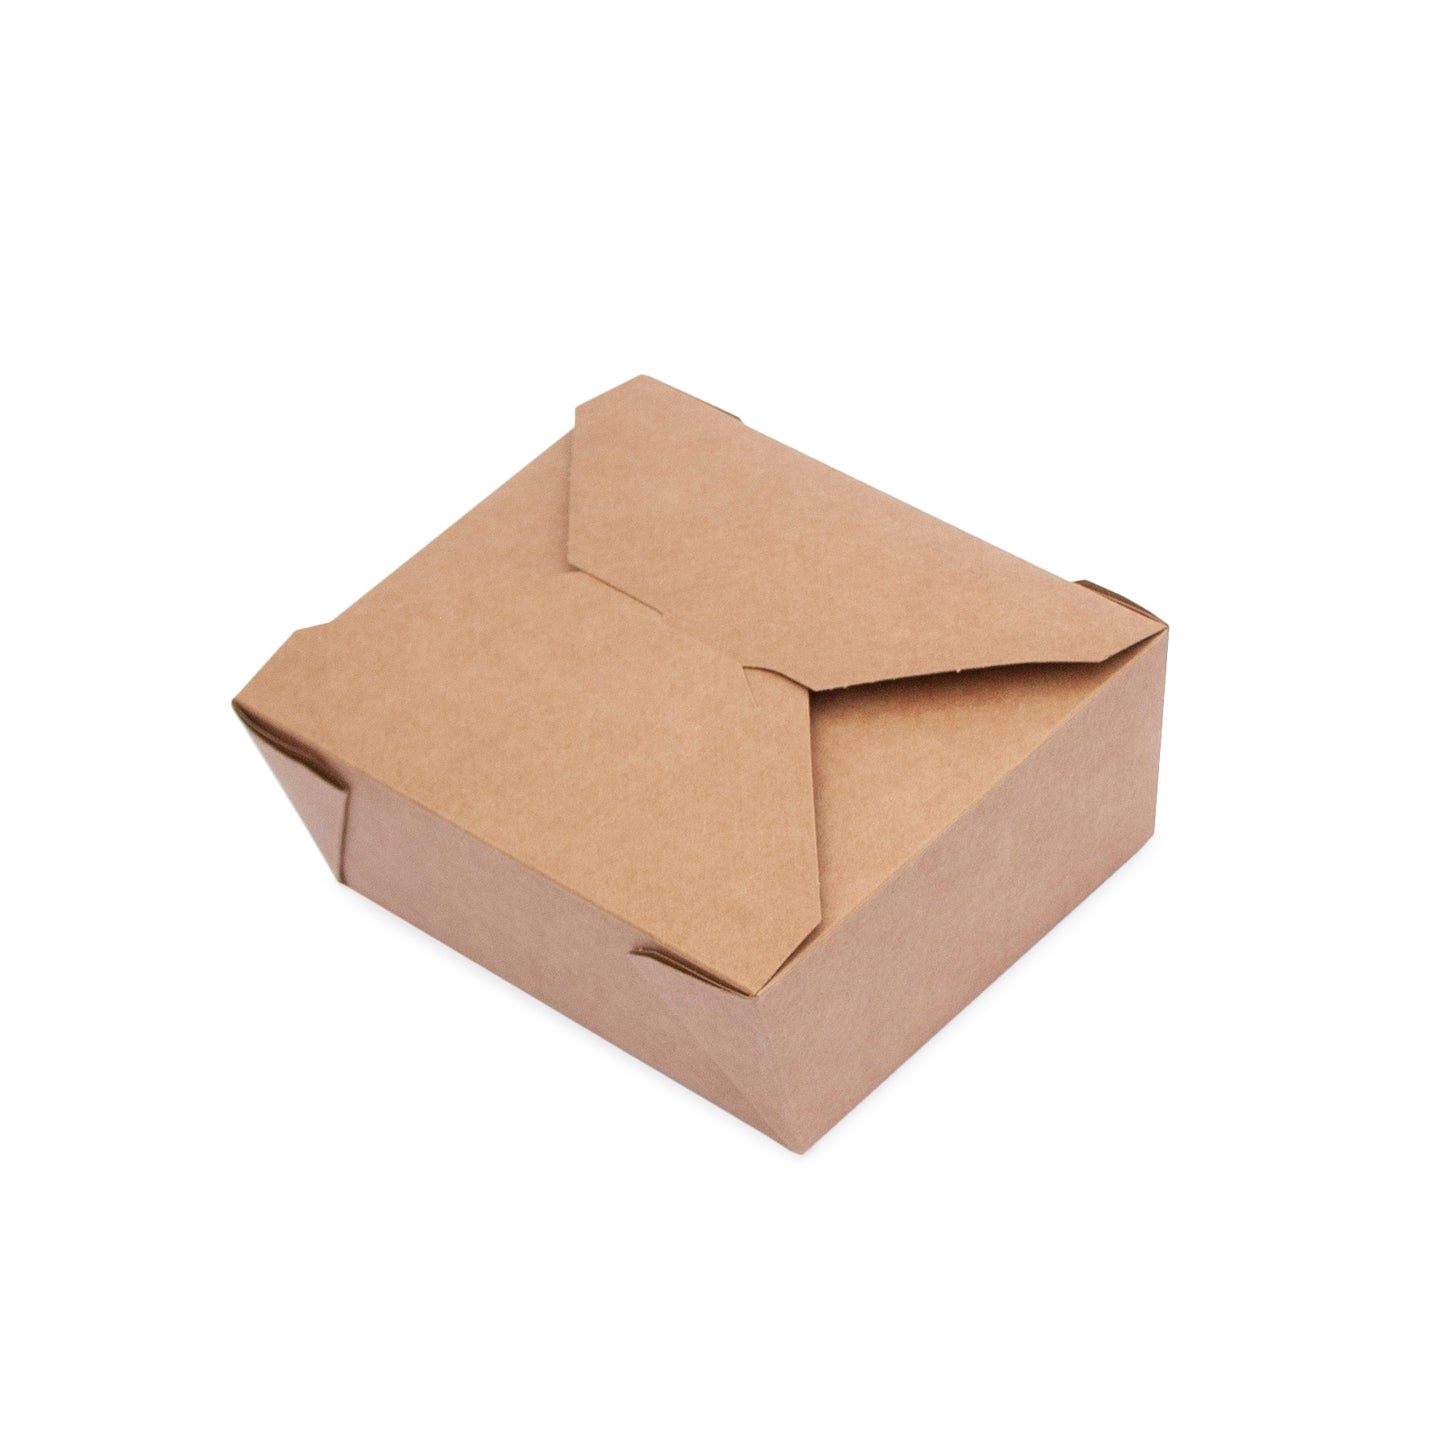 Leakproof food container No.3 kraft food-to-go carton 180 units, 1800ml (19.5 x 14 x 6.5cm)